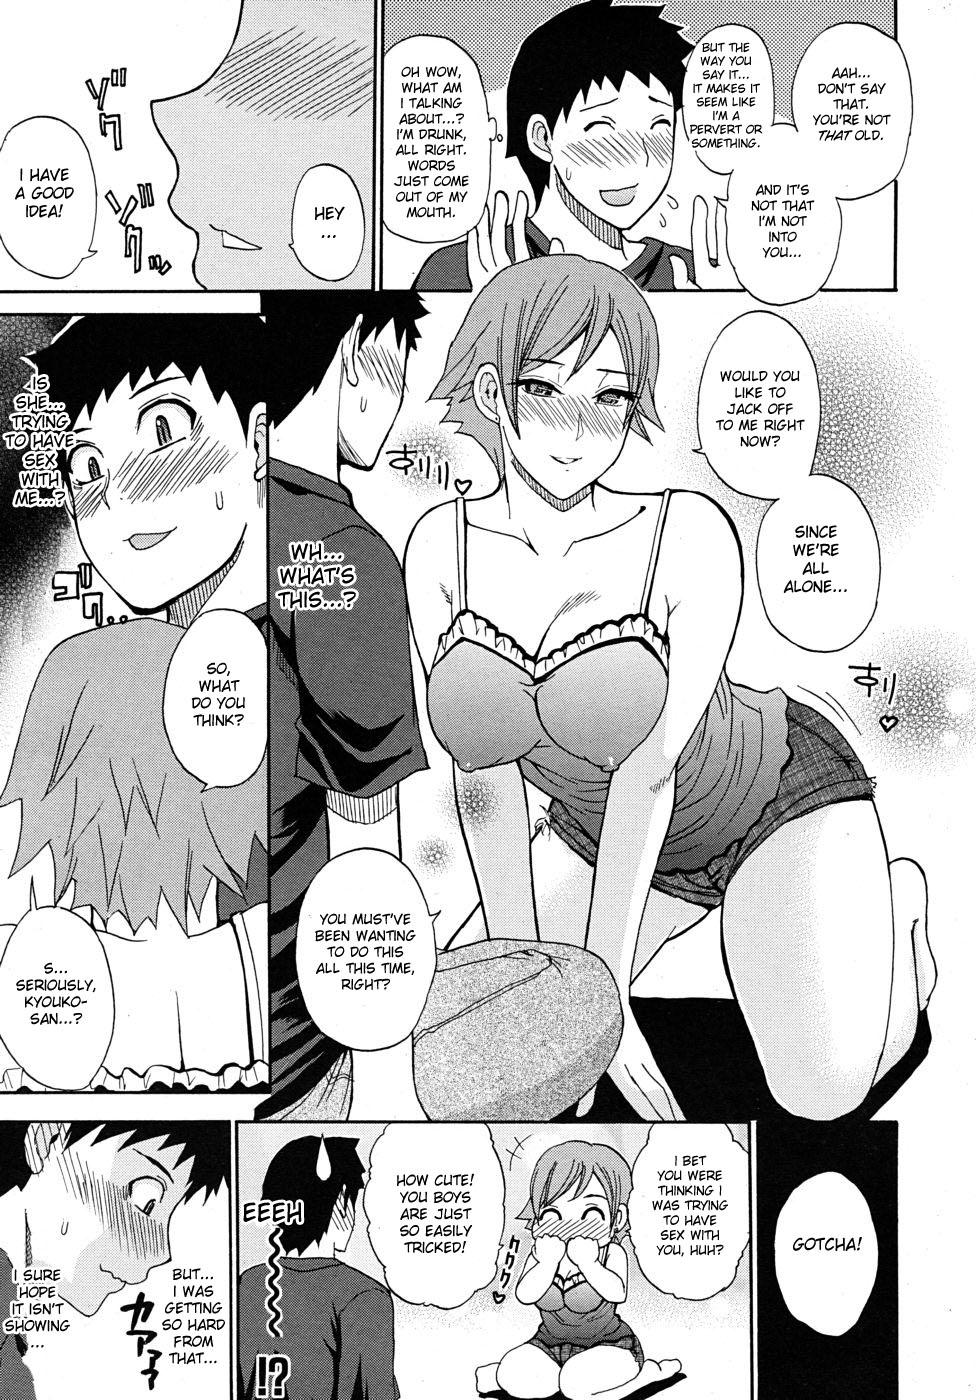 Best Blowjobs Yuukan Days | Leisurely Days Coeds - Page 5